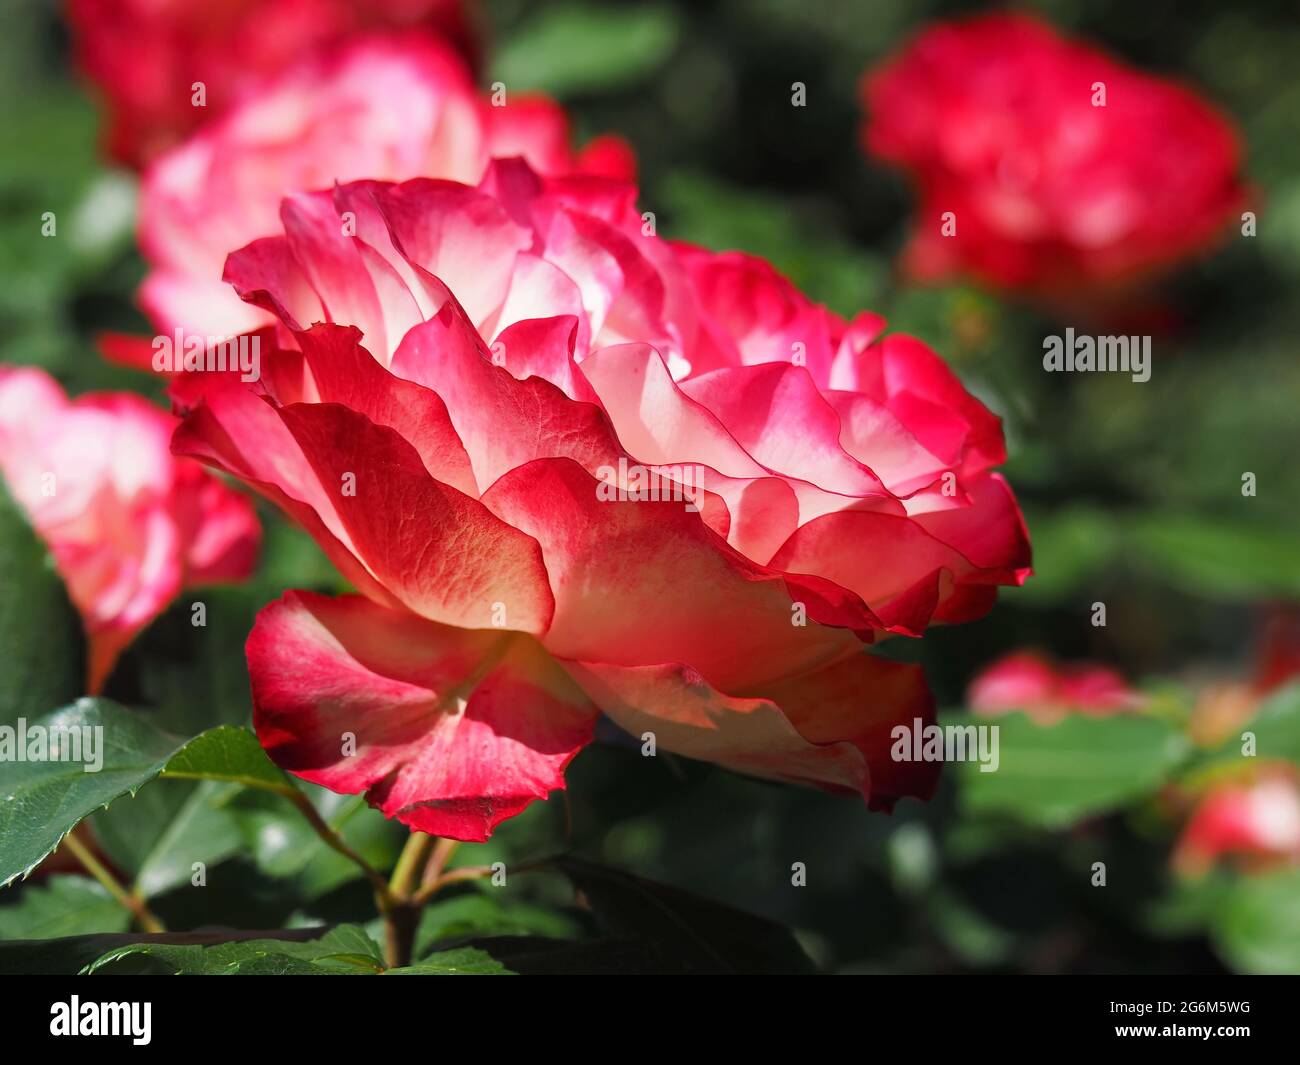 Beautiful red and white rose Double Delight blooming in a garden Stock Photo